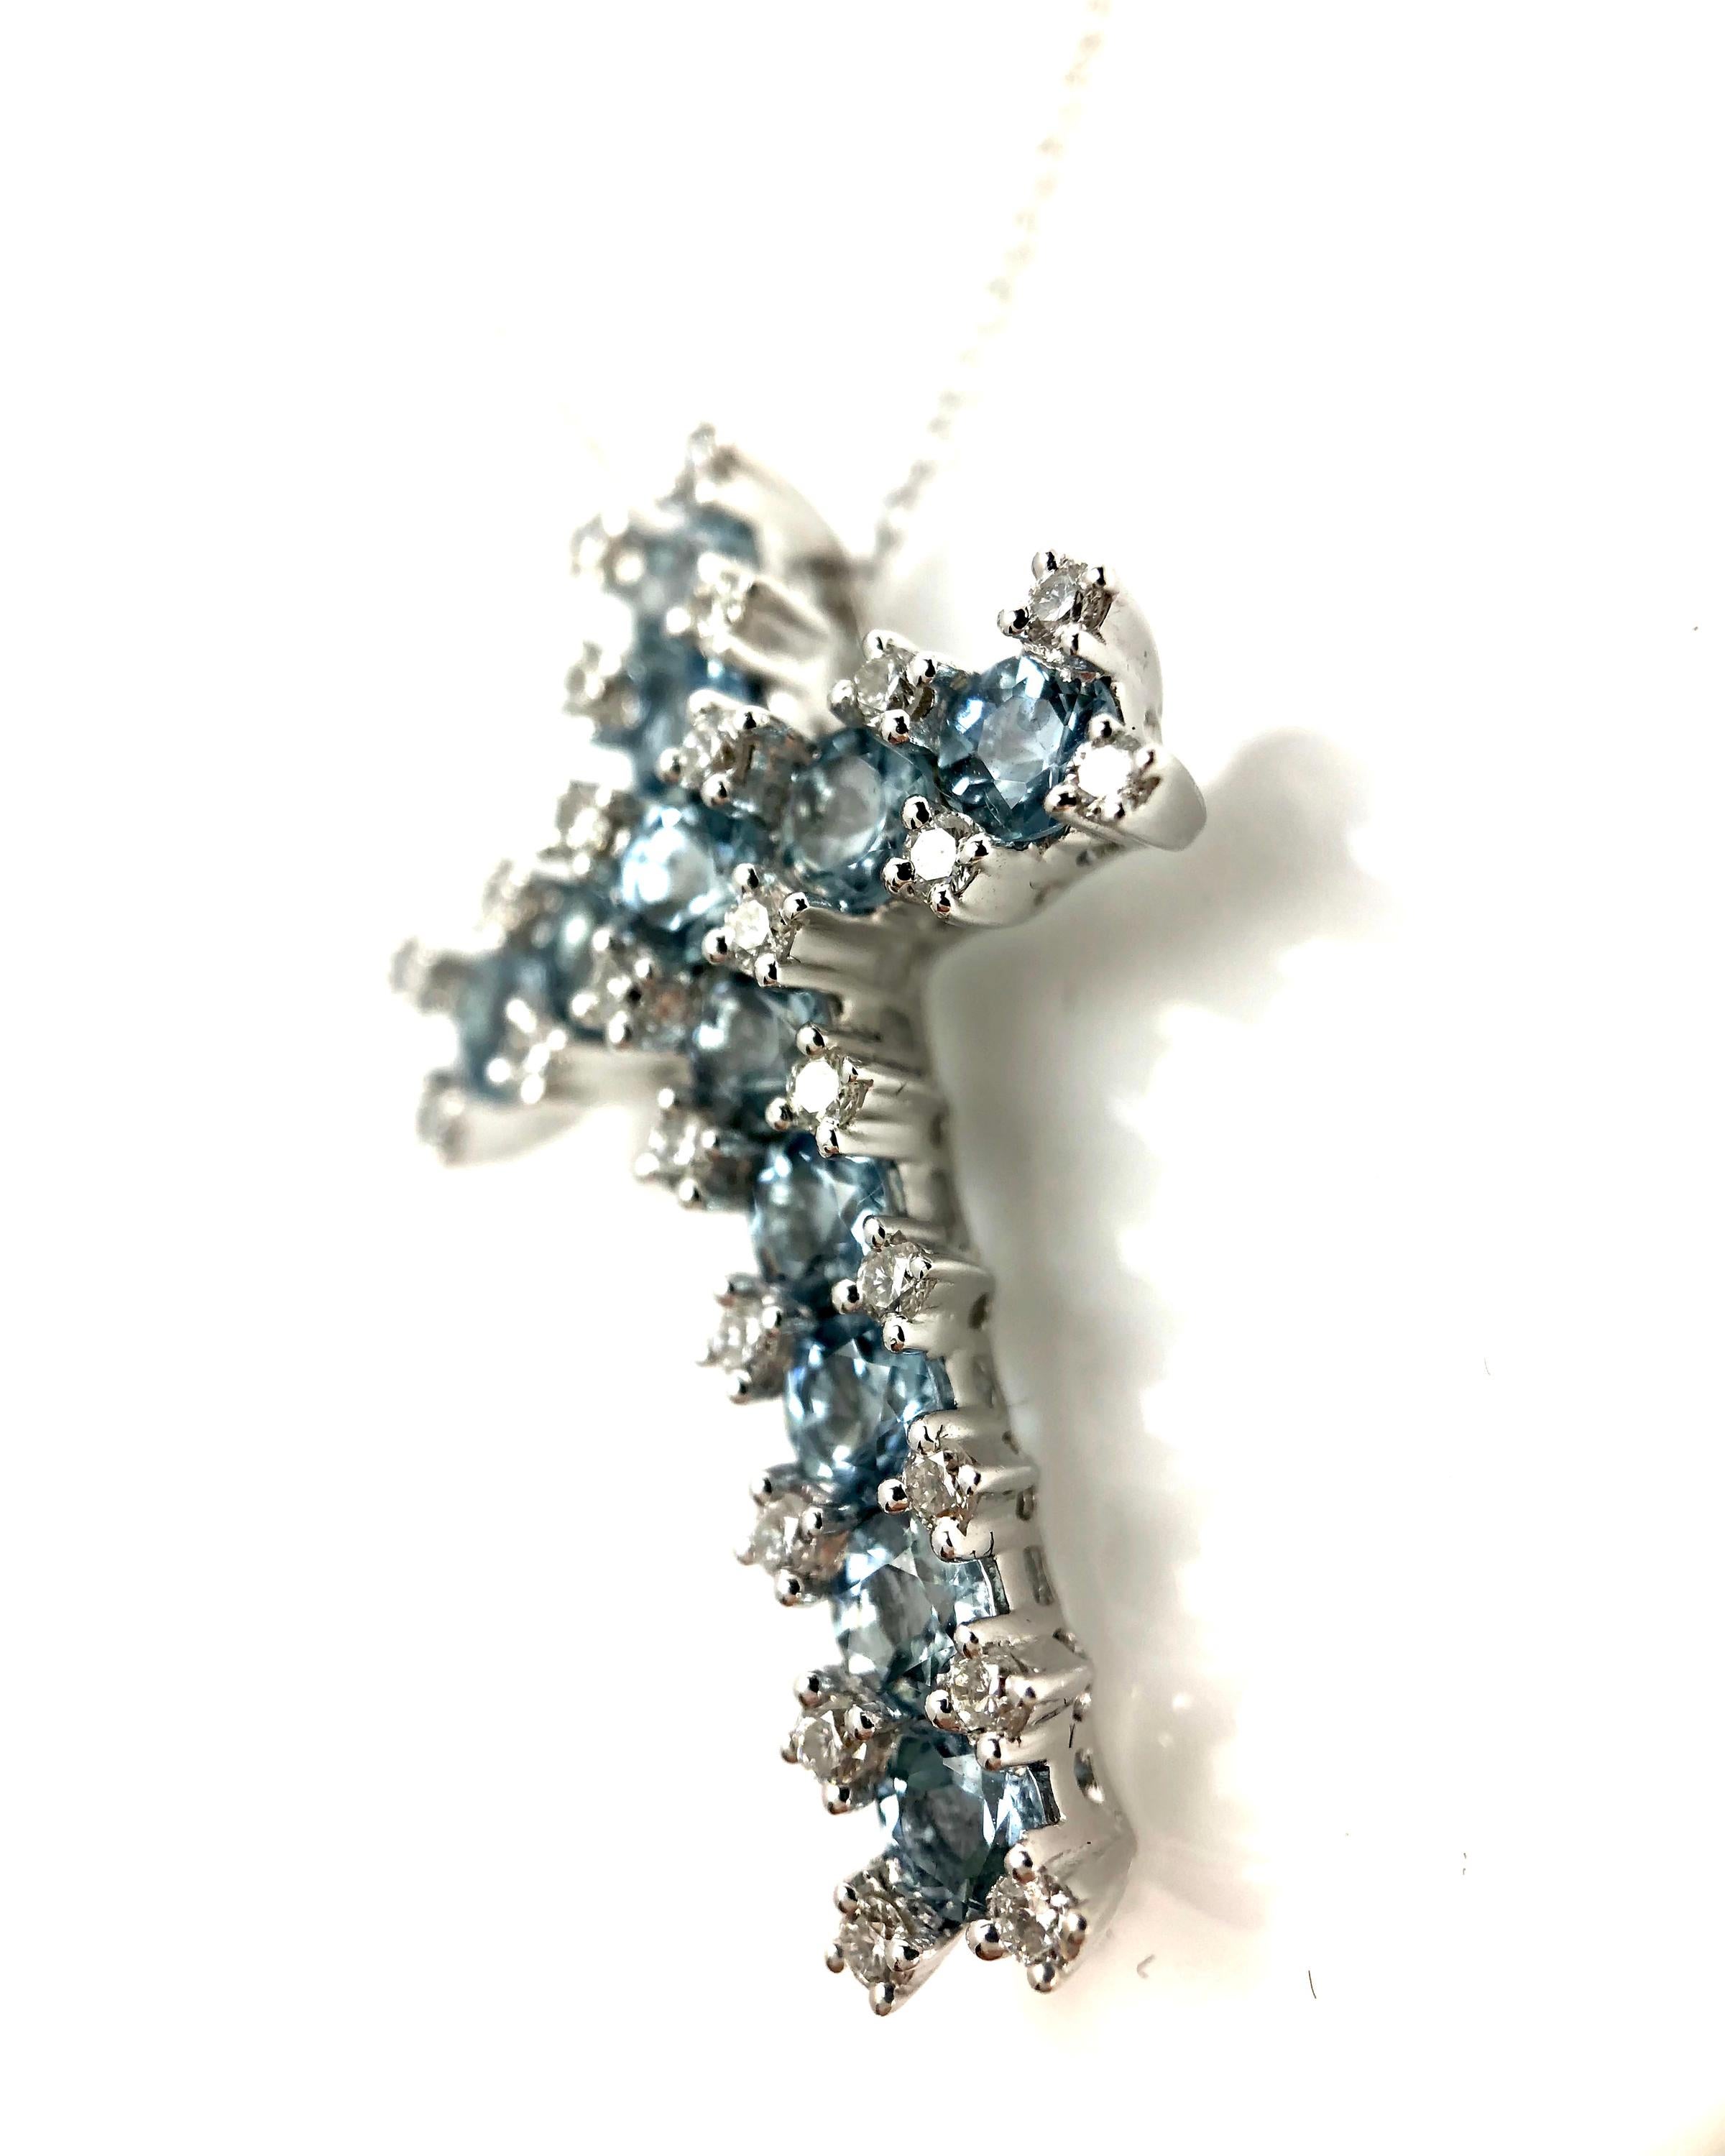 This lovely cross pendant features 1.22 carats round cut Aquamarine, set among 0.29 carats round white diamonds.

1.22 carats Aquamarine, 12 stones
26 round diamonds total 0.29 carats
Set in 18k White Gold.

Many of our items have matching companion